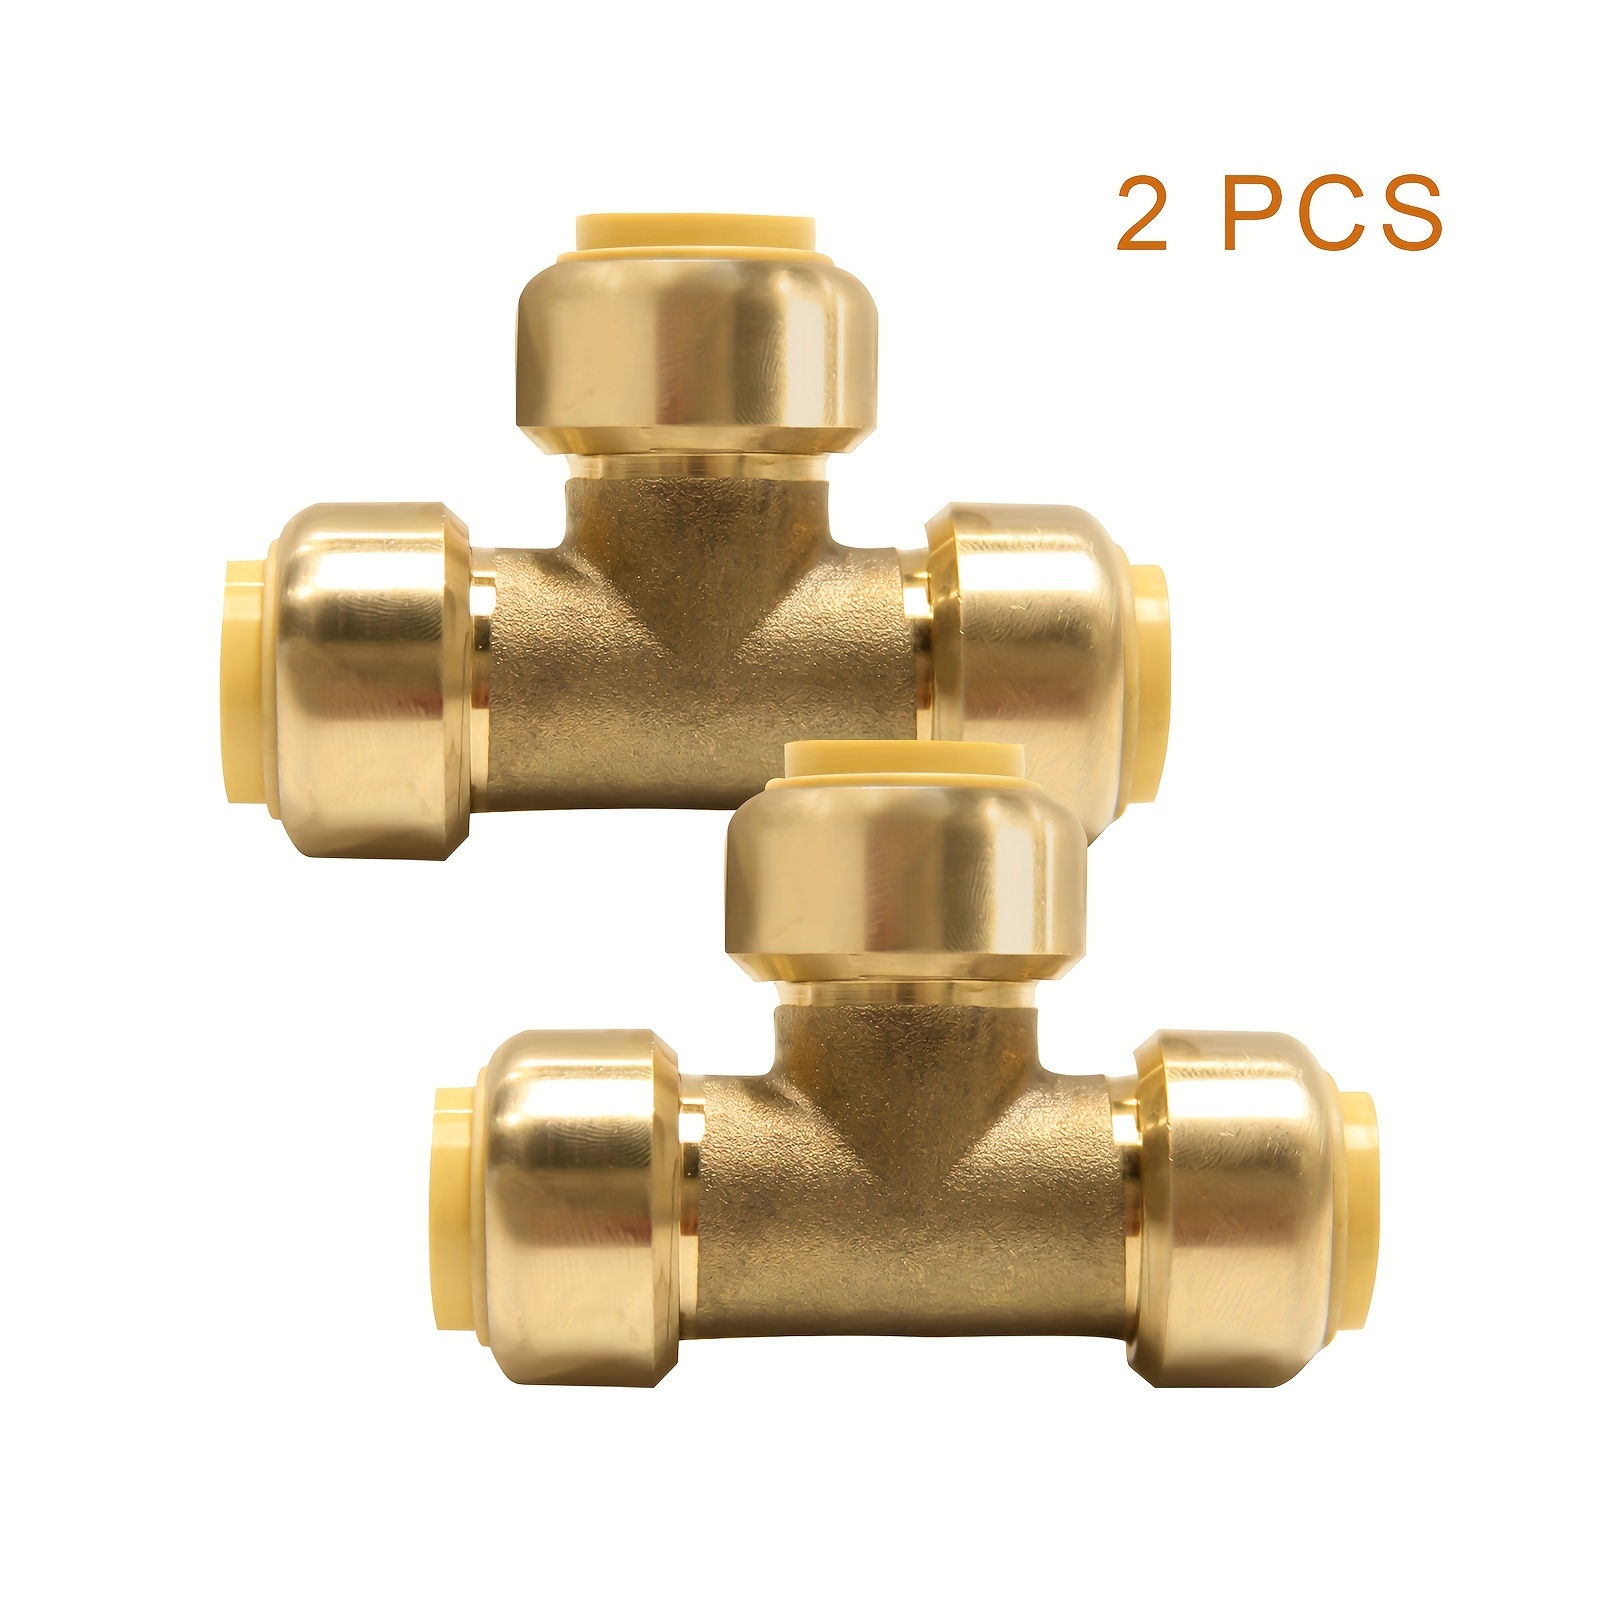 

2 1/2 In Npt American Standard Three-way Push-in Quick Connectors, Lead-free Copper Push-in Quick Connectors Used For Connecting Pex, Copper, Cpvc Pipes.